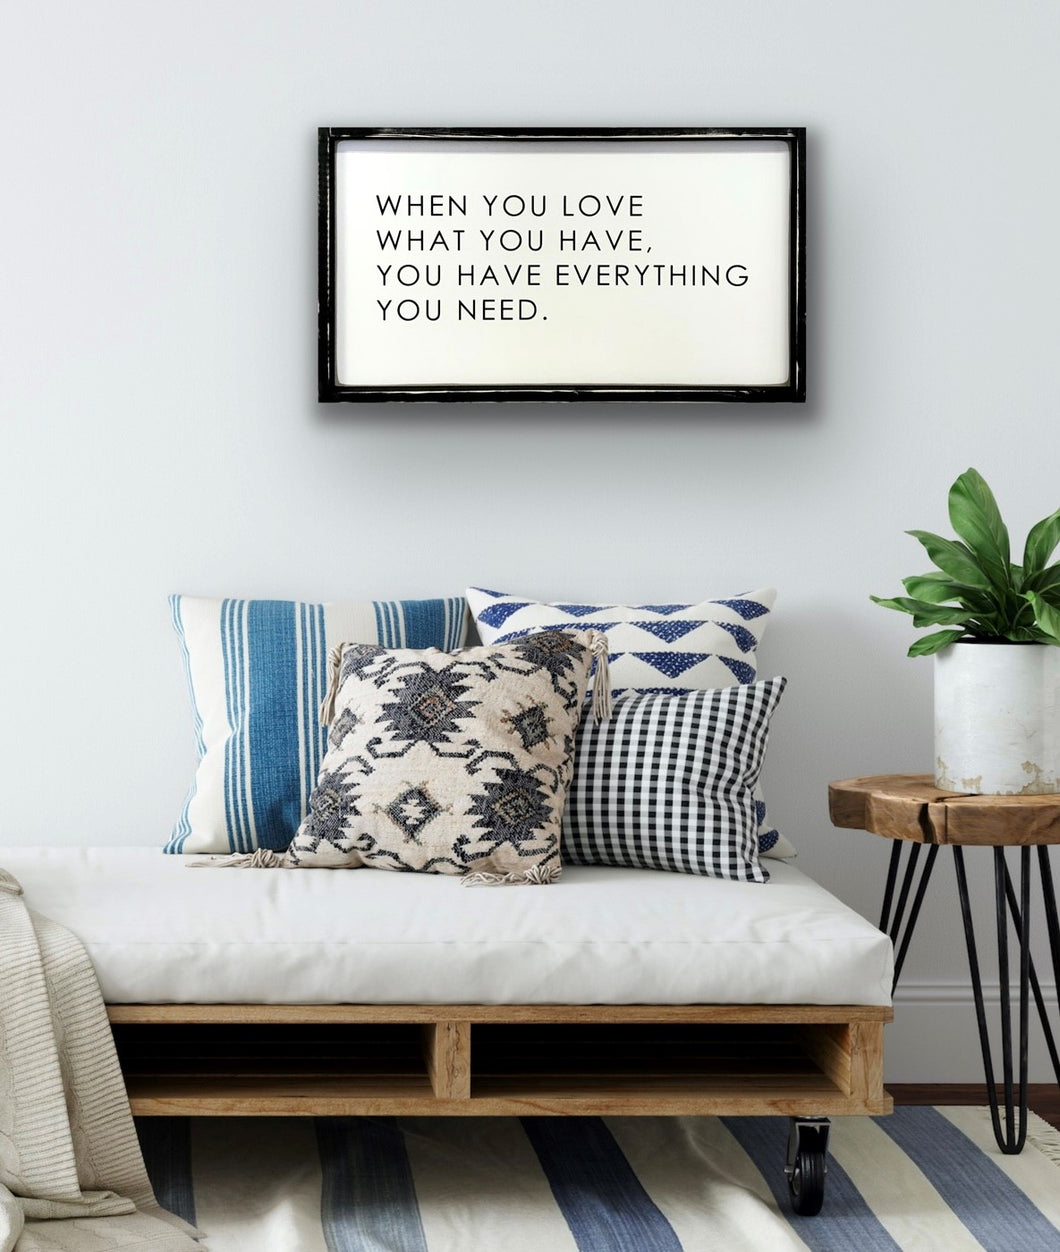 When you Love what you have - New Style Wood Sign